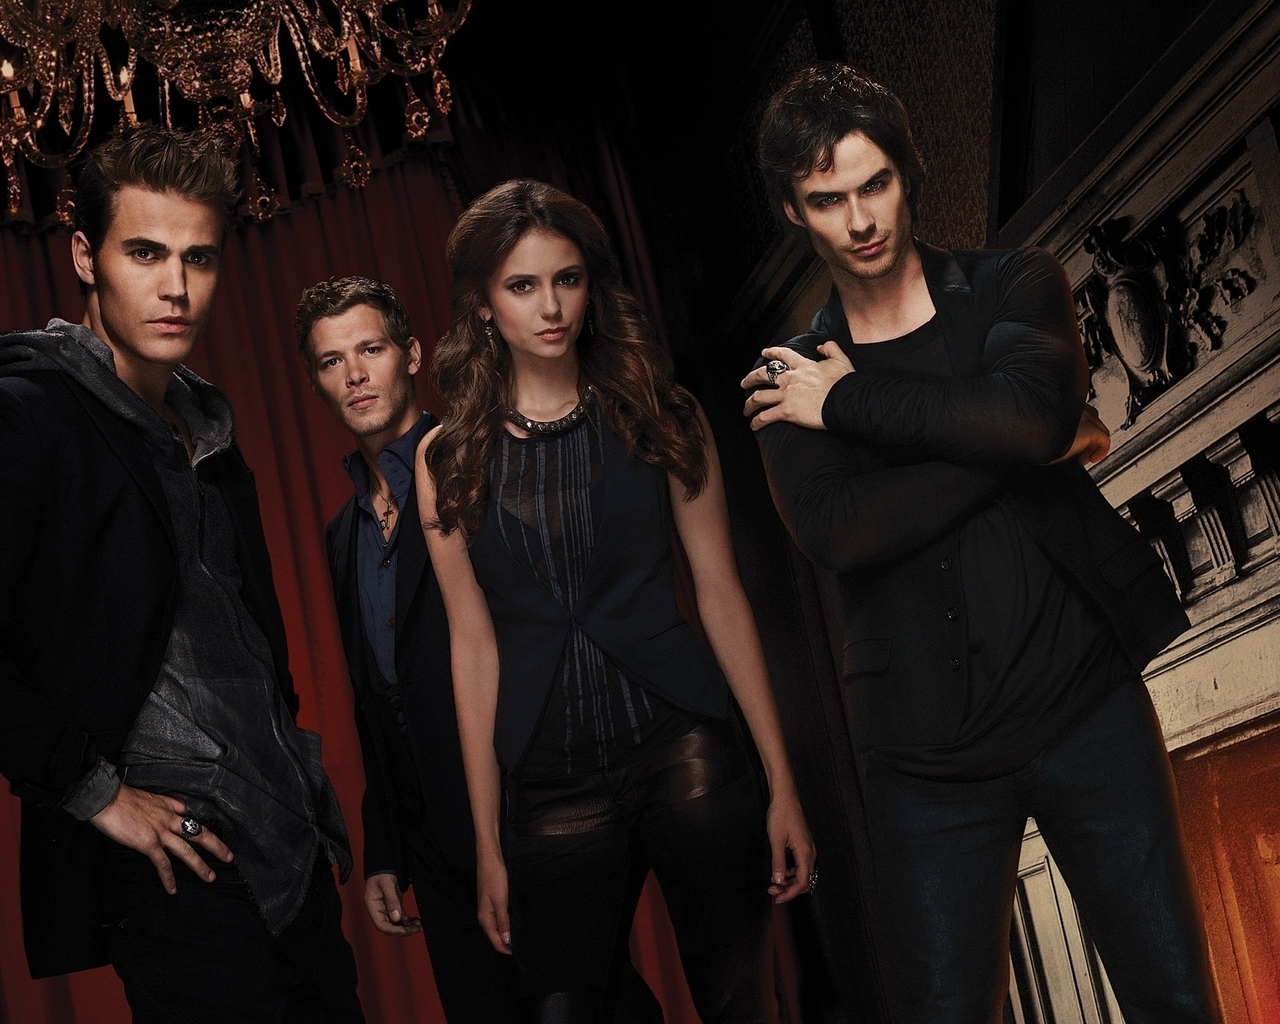 The Vampire Diaries Actors for 1280 x 1024 resolution